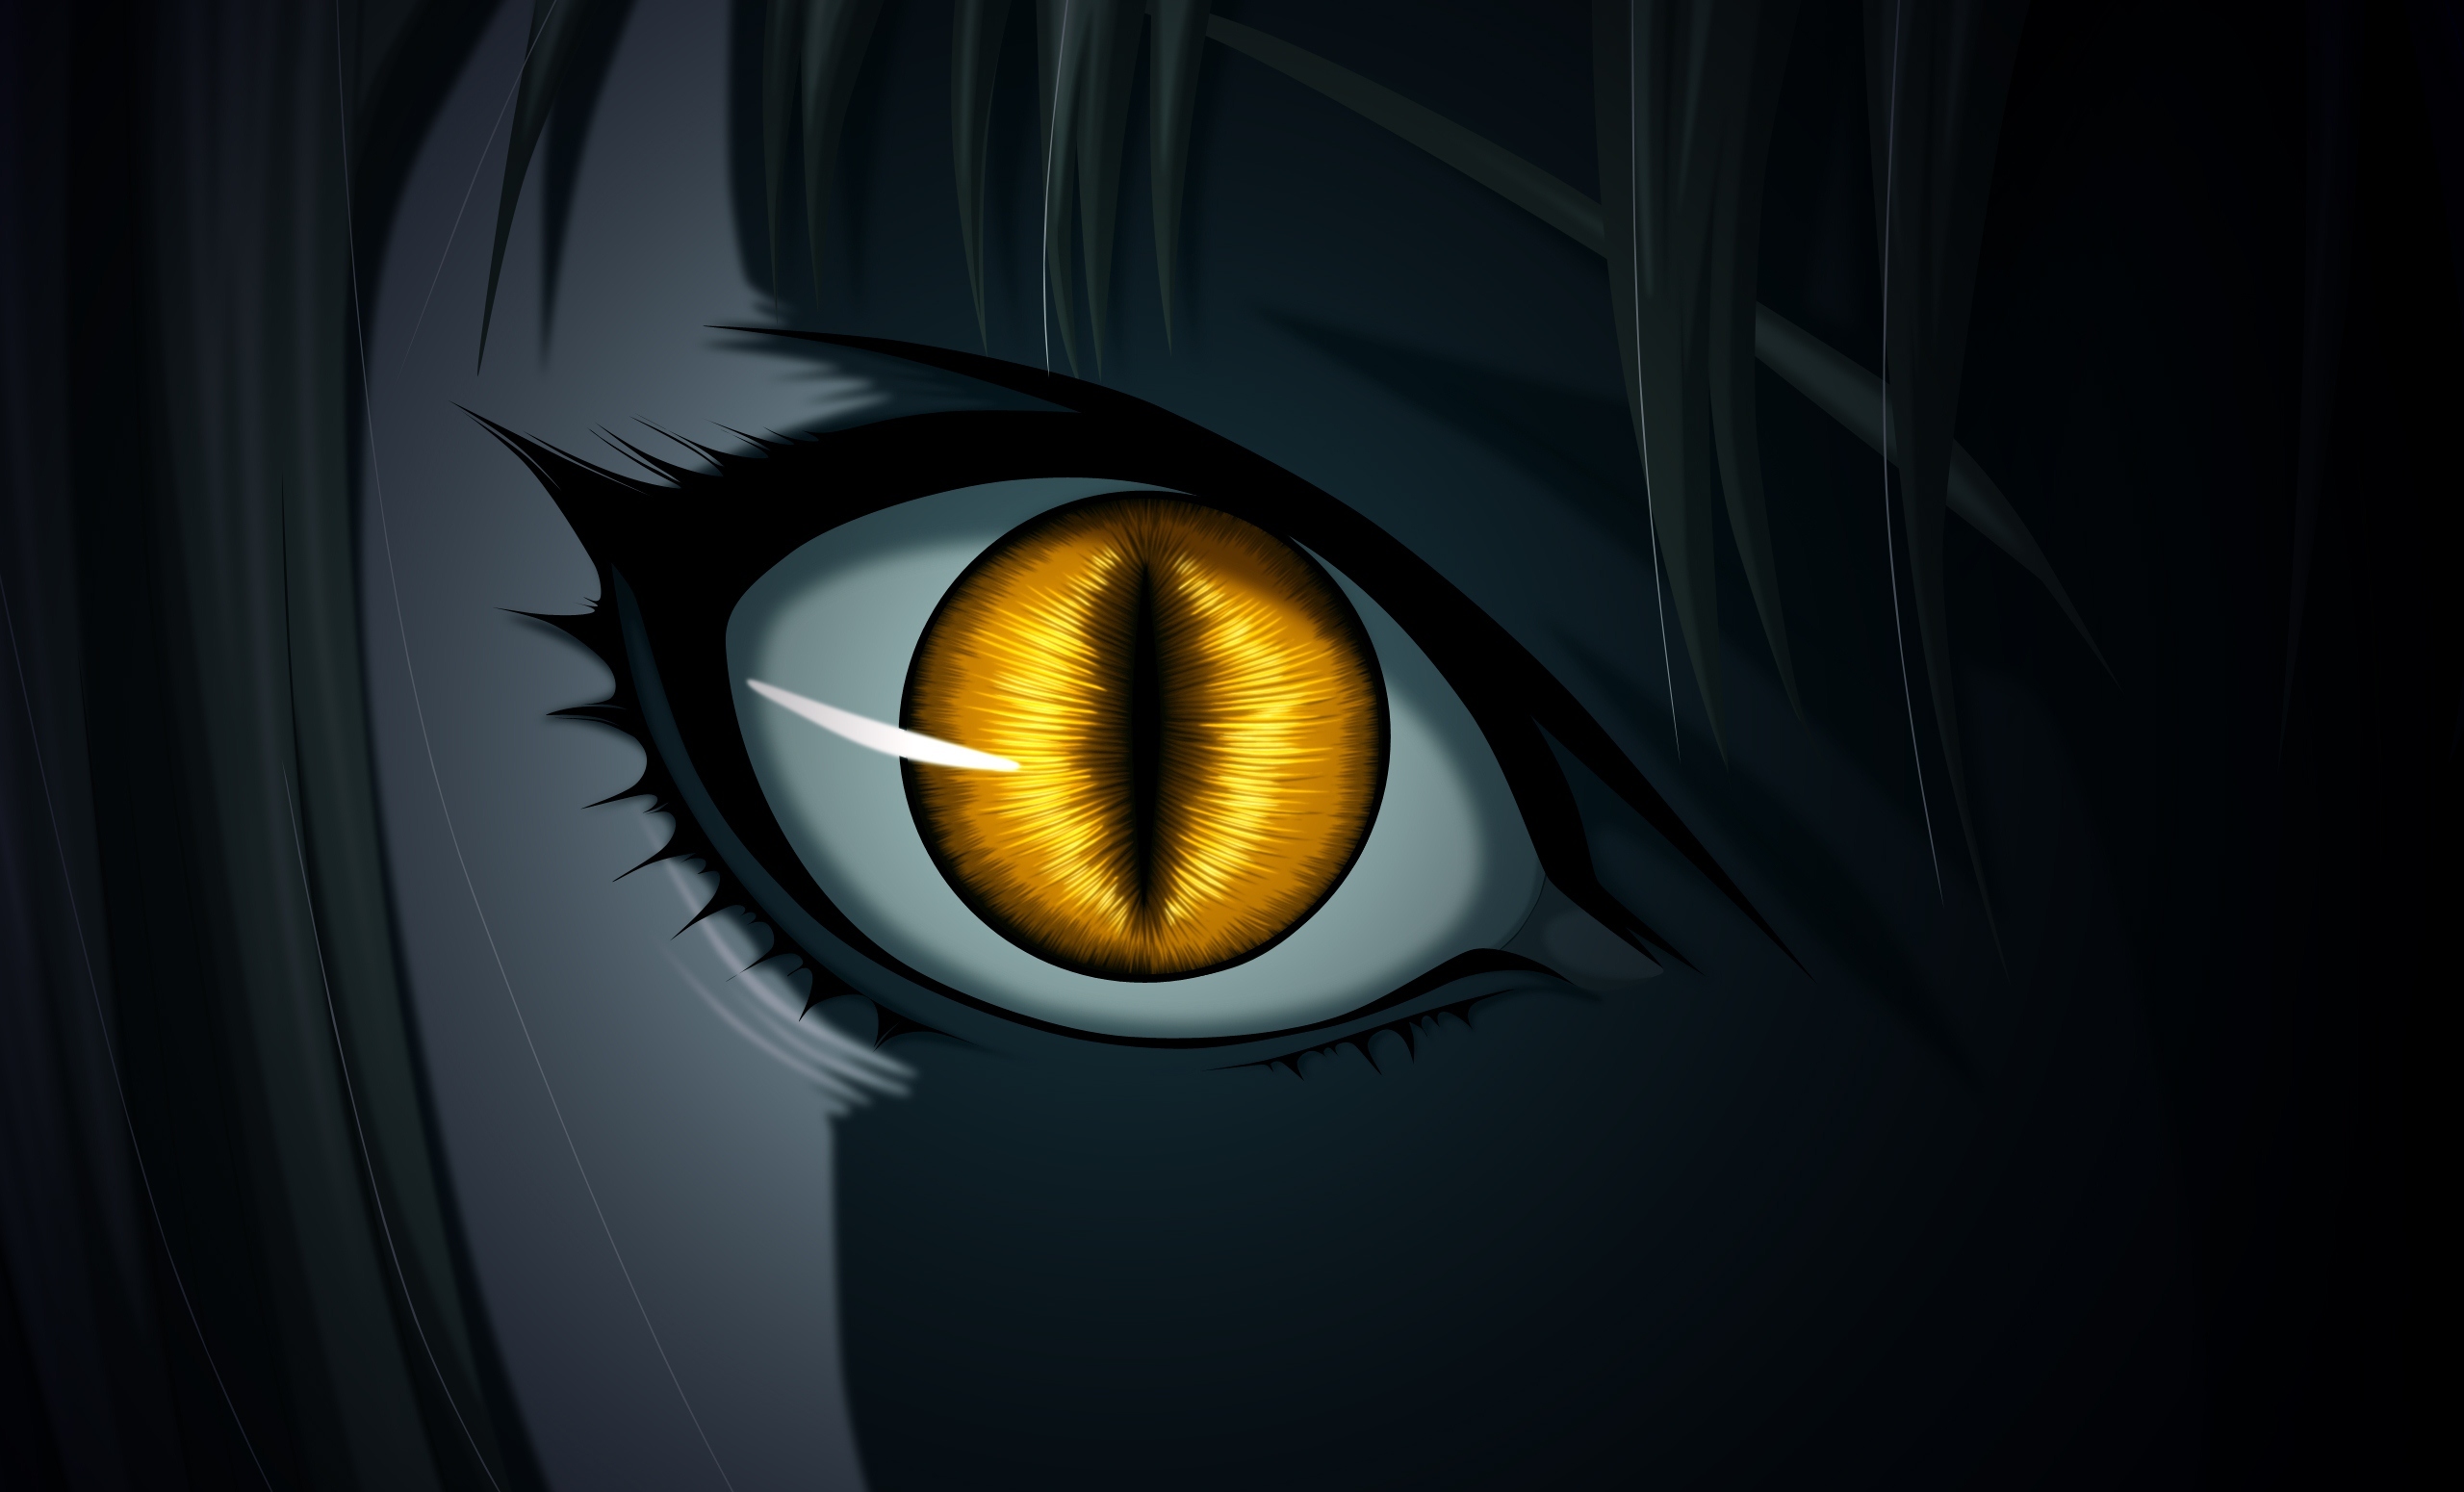 Anime Evil Girl Posters for Sale | Redbubble